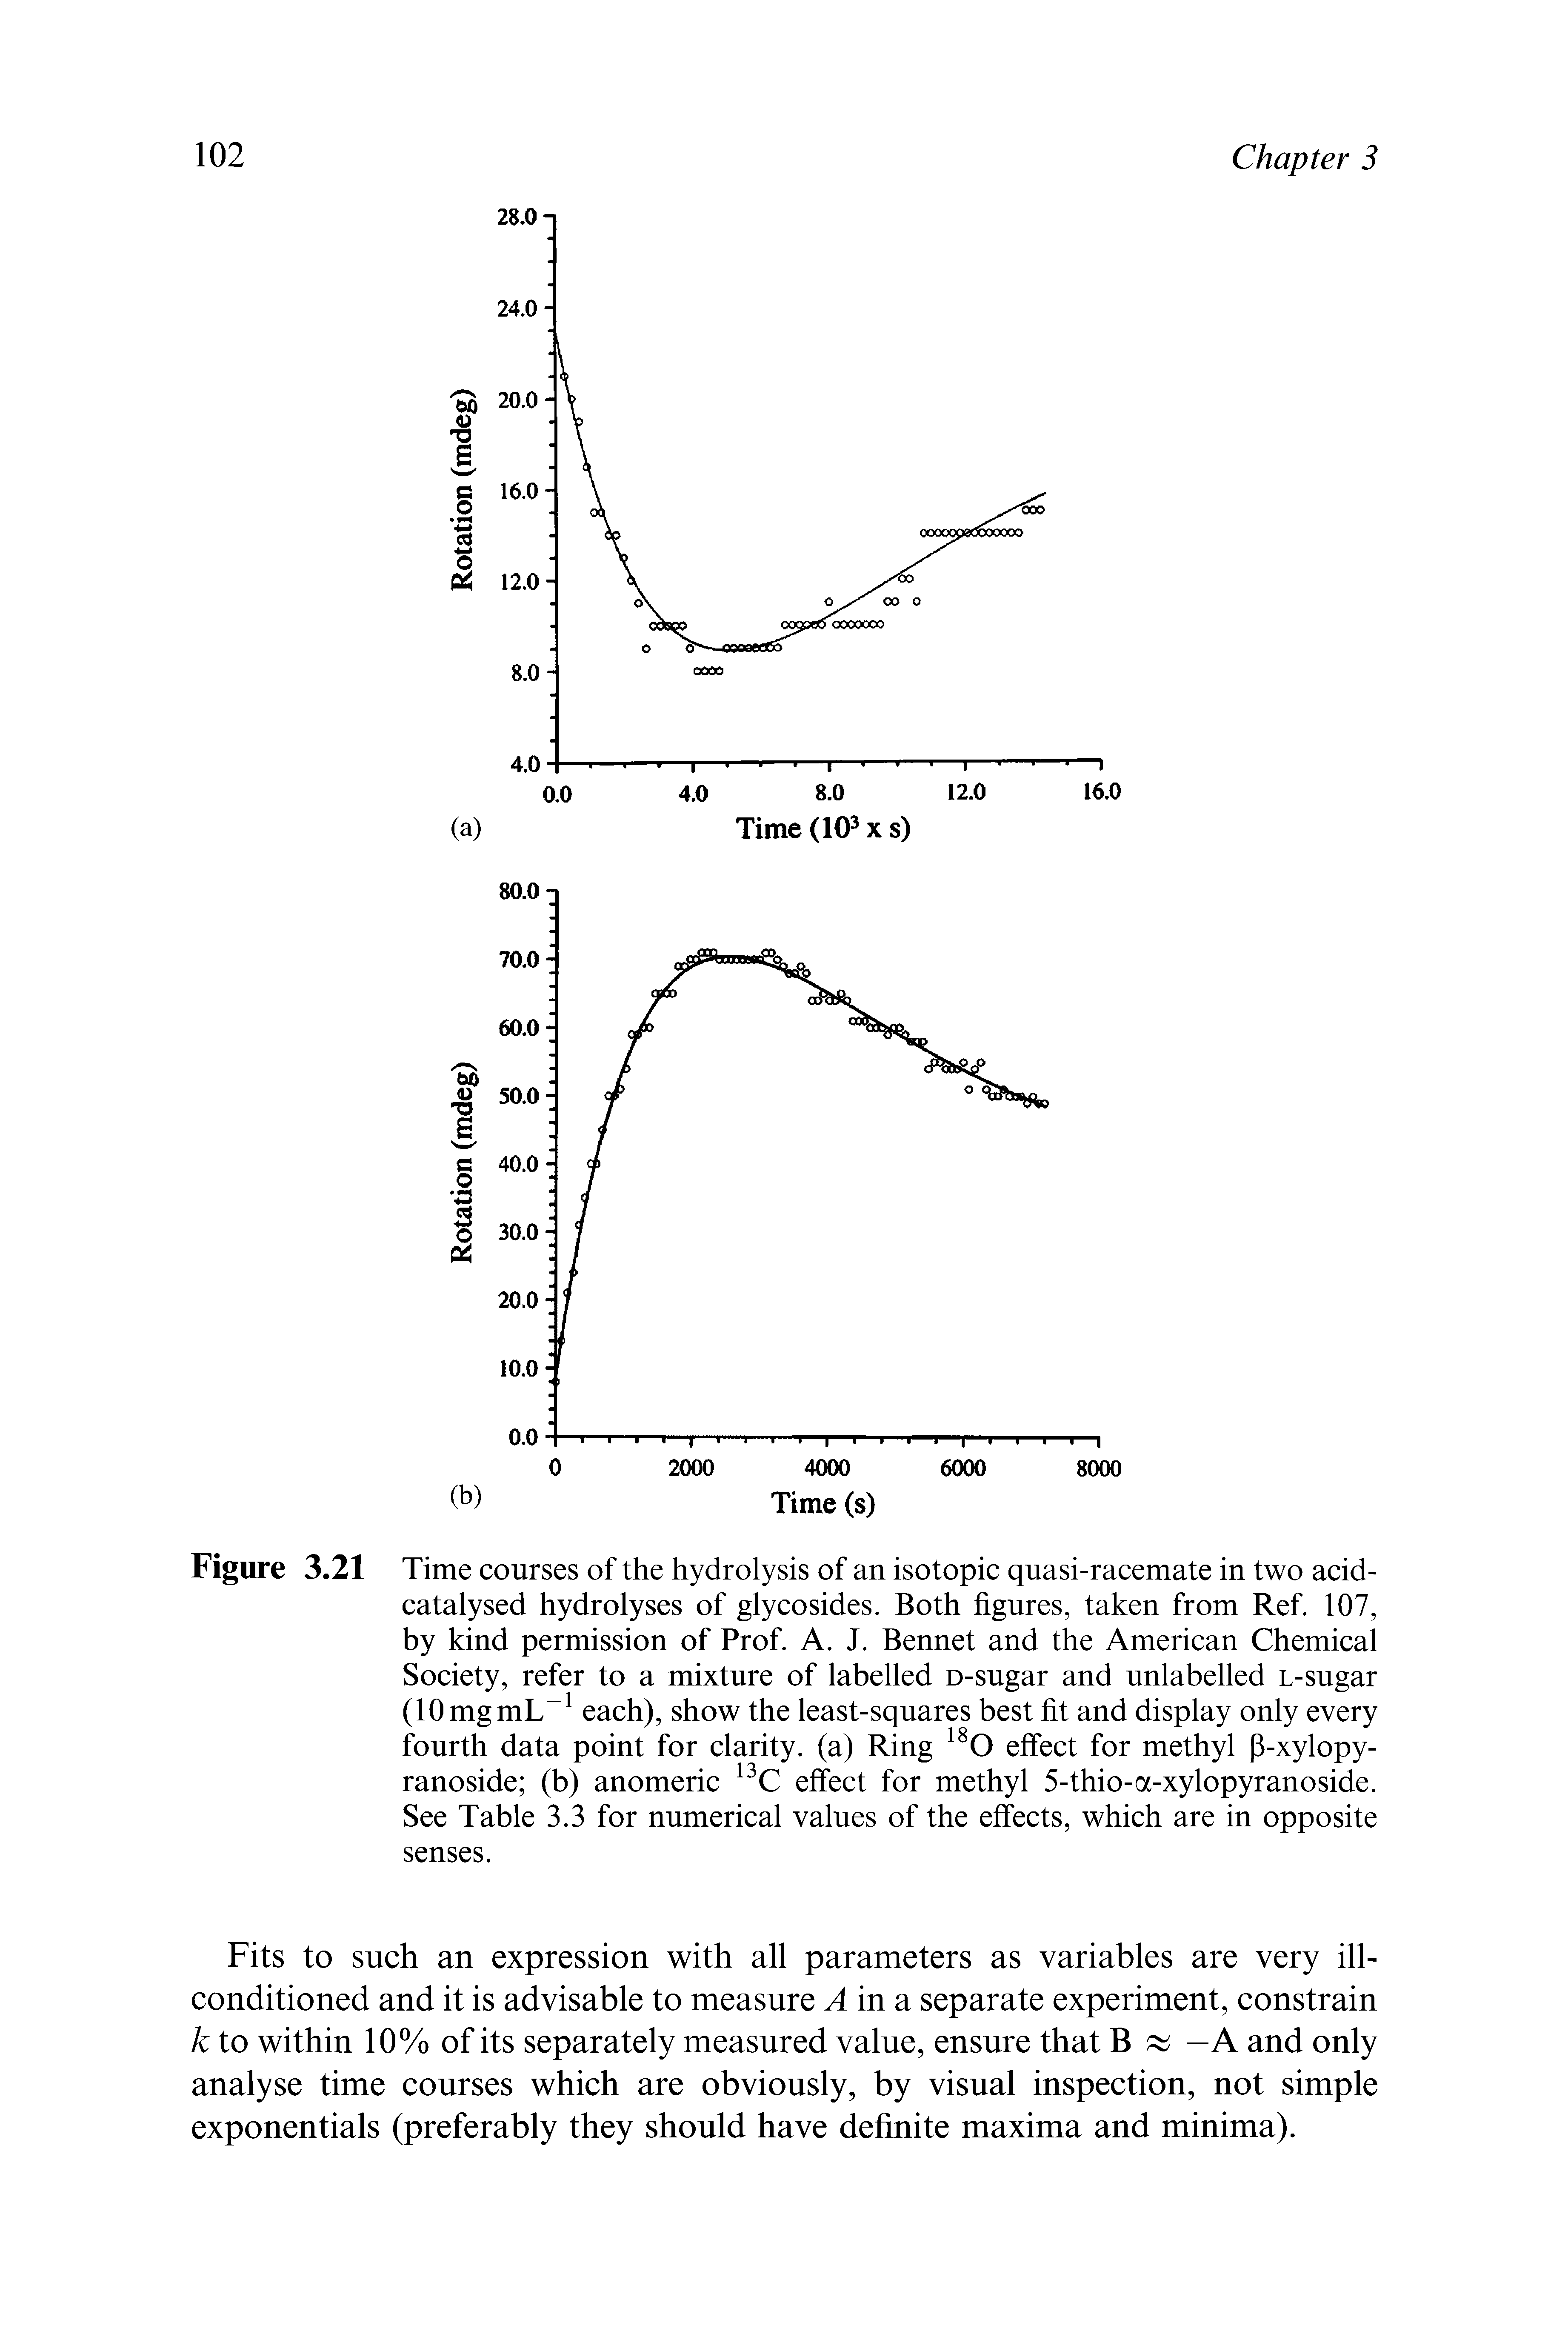 Figure 3.21 Time courses of the hydrolysis of an isotopic quasi-racemate in two acid-catalysed hydrolyses of glycosides. Both figures, taken from Ref. 107, by kind permission of Prof. A. J. Bennet and the American Chemical Society, refer to a mixture of labelled d-sugar and unlabelled l-sugar (10mgmL each), show the least-squares best fit and display only every fourth data point for clarity, (a) Ring effect for methyl (3-xylopy-ranoside (b) anomeric effect for methyl 5-thio-oc-xylopyranoside. See Table 3.3 for numerical values of the effects, which are in opposite senses.